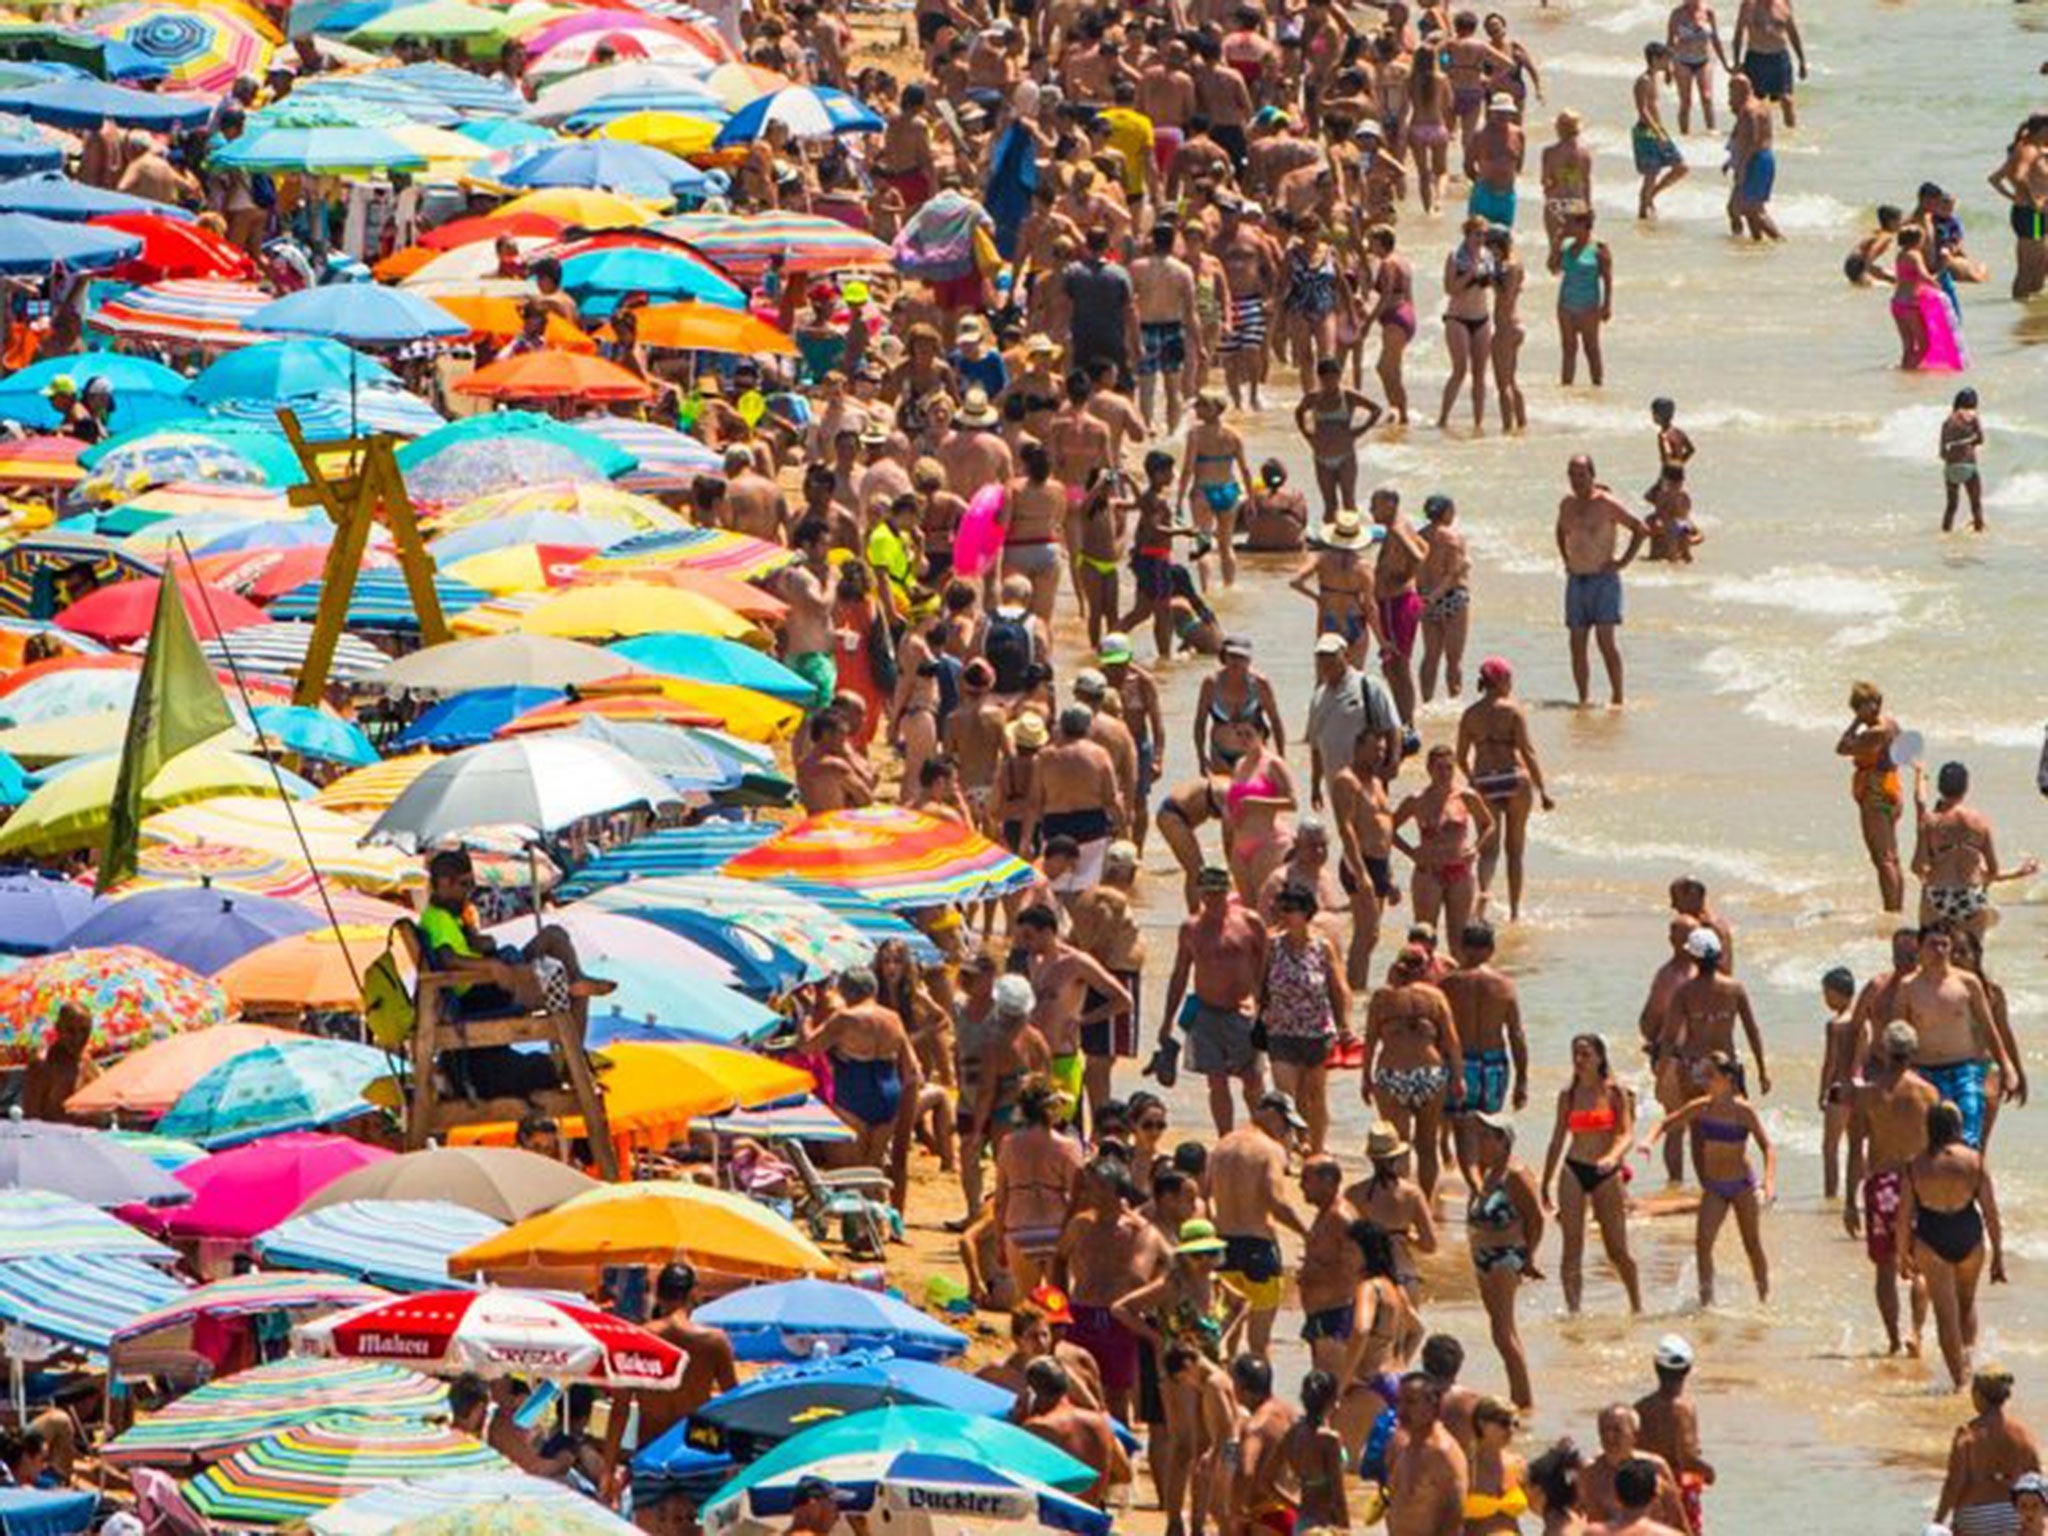 Spain has set a new record for visitors, with 29.2 million visitors in June, 4.2% more than the same period in 2014